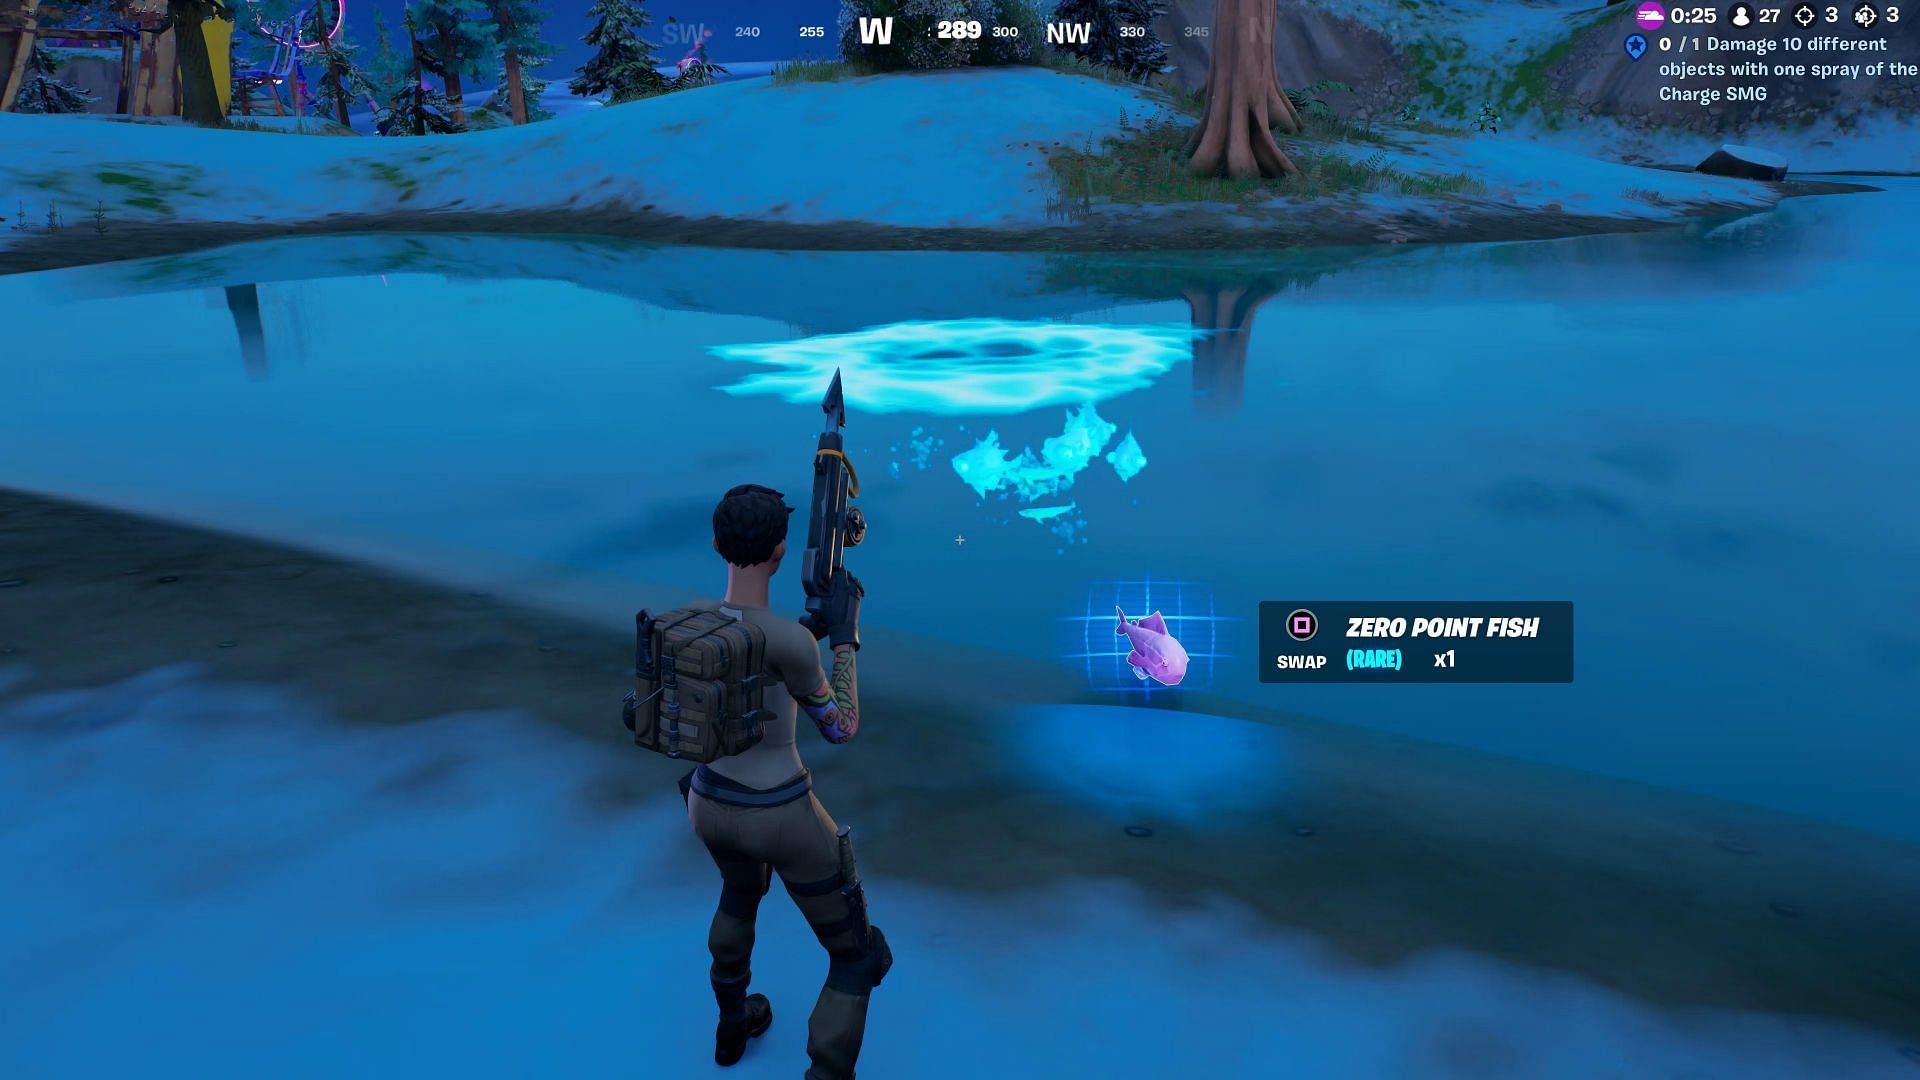 Fortnite players have to hit an opponent within 3 seconds of dashing with a Zero Point Fish (Image via Epic Games)